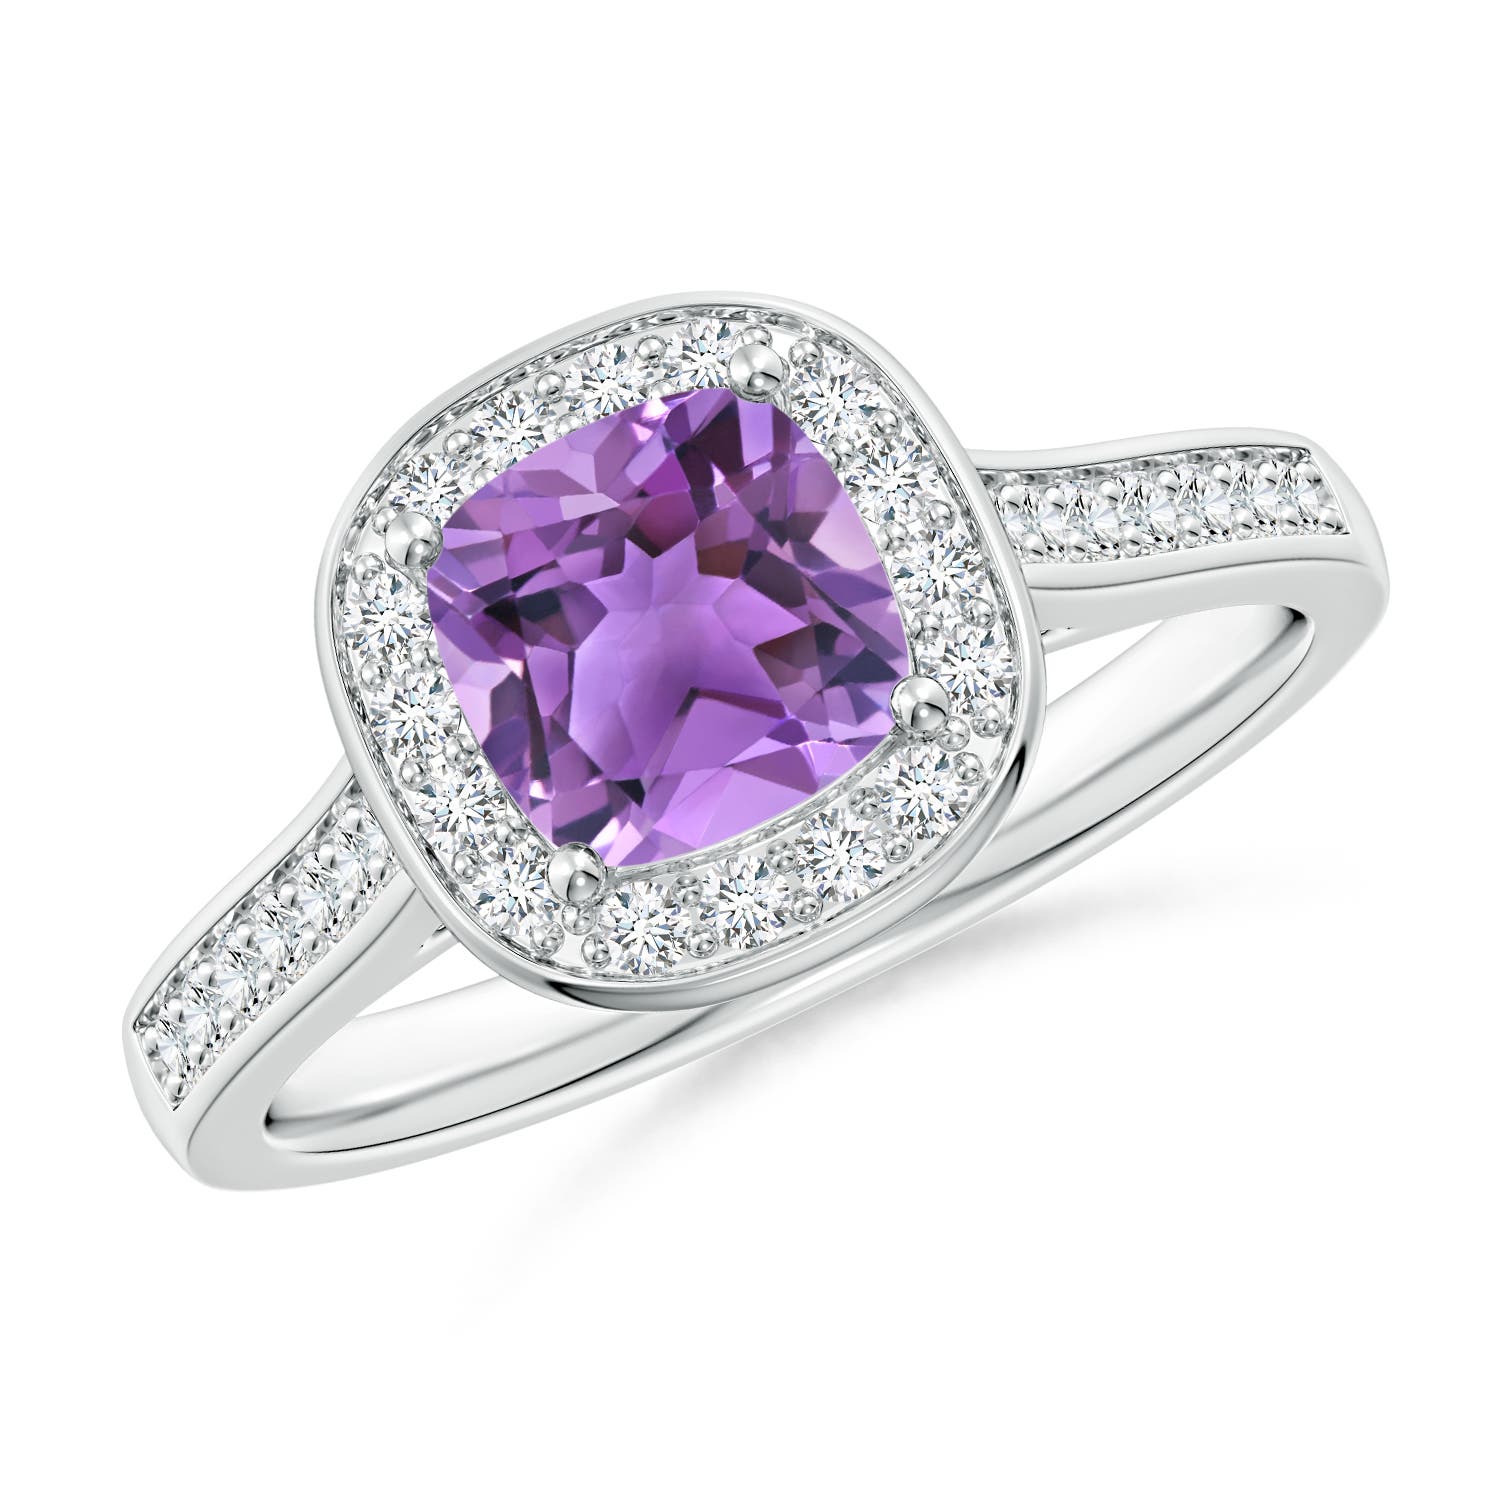 AA - Amethyst / 1.08 CT / 14 KT White Gold